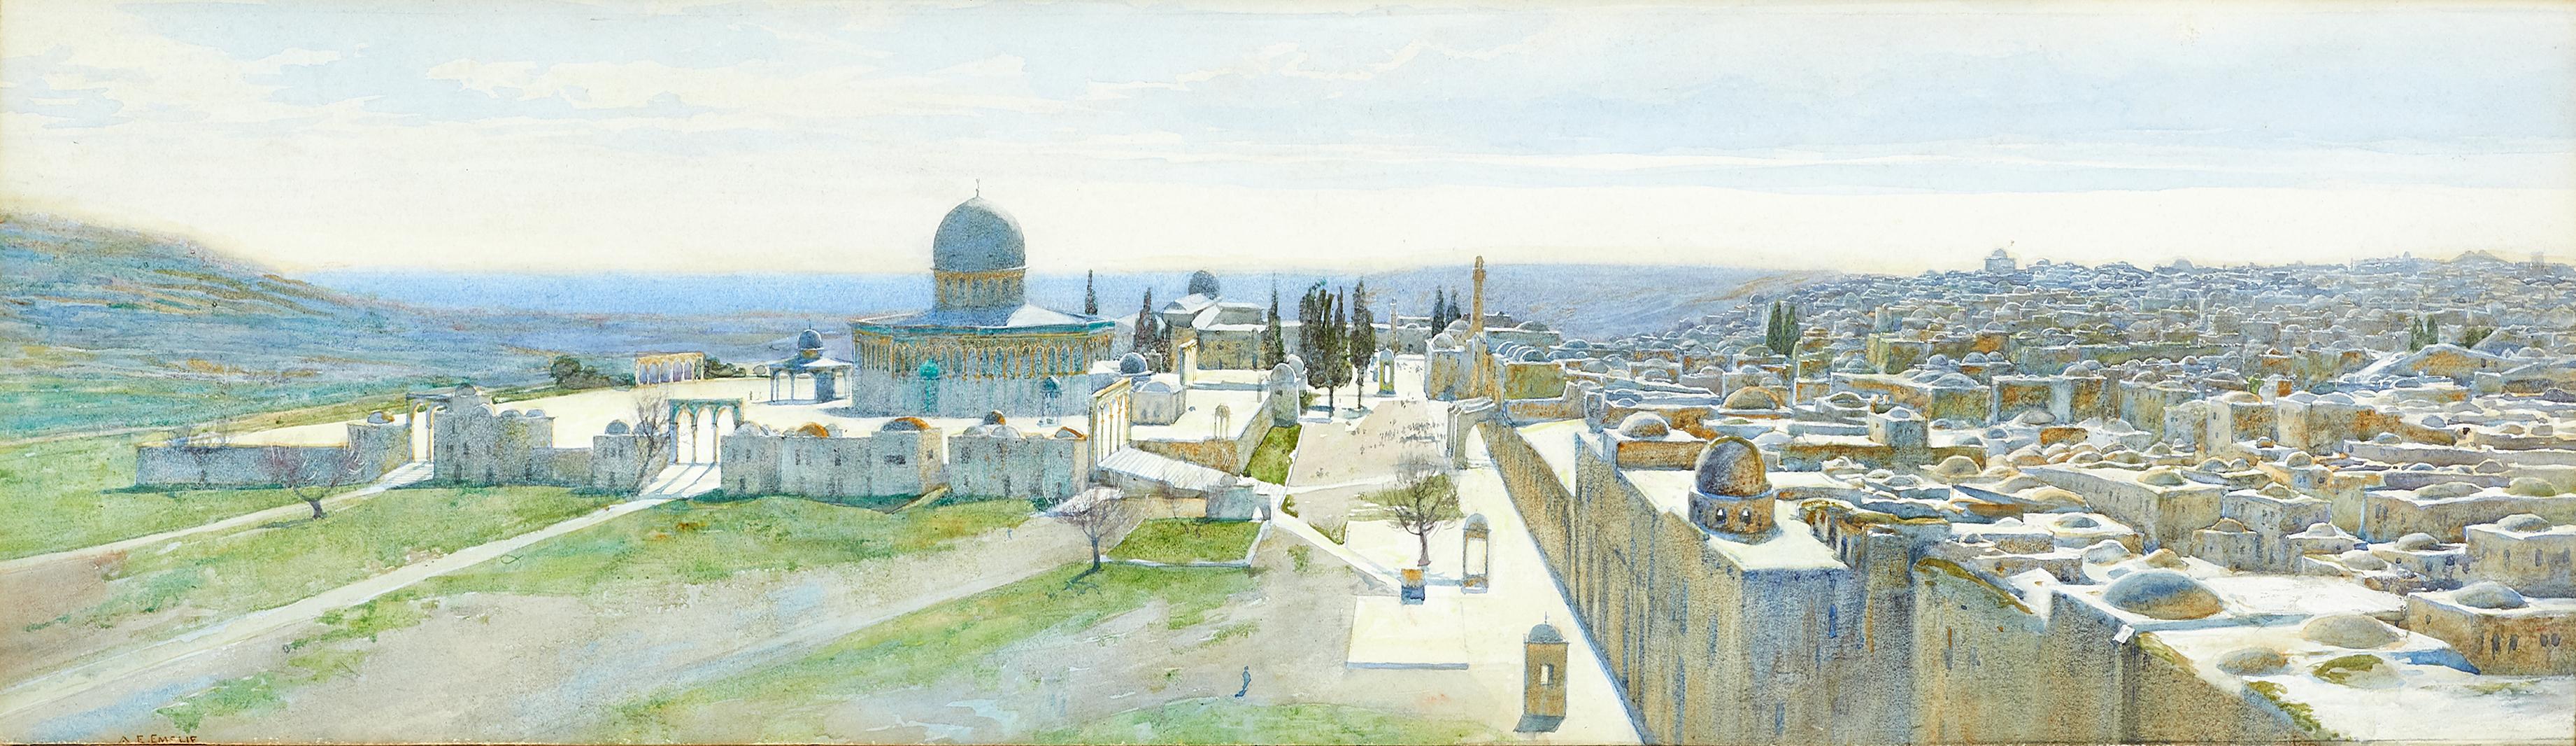 Alfred Edward Emslie Landscape Art - Dome of the Rock and Temple Area from the North, 18th Century Watercolour